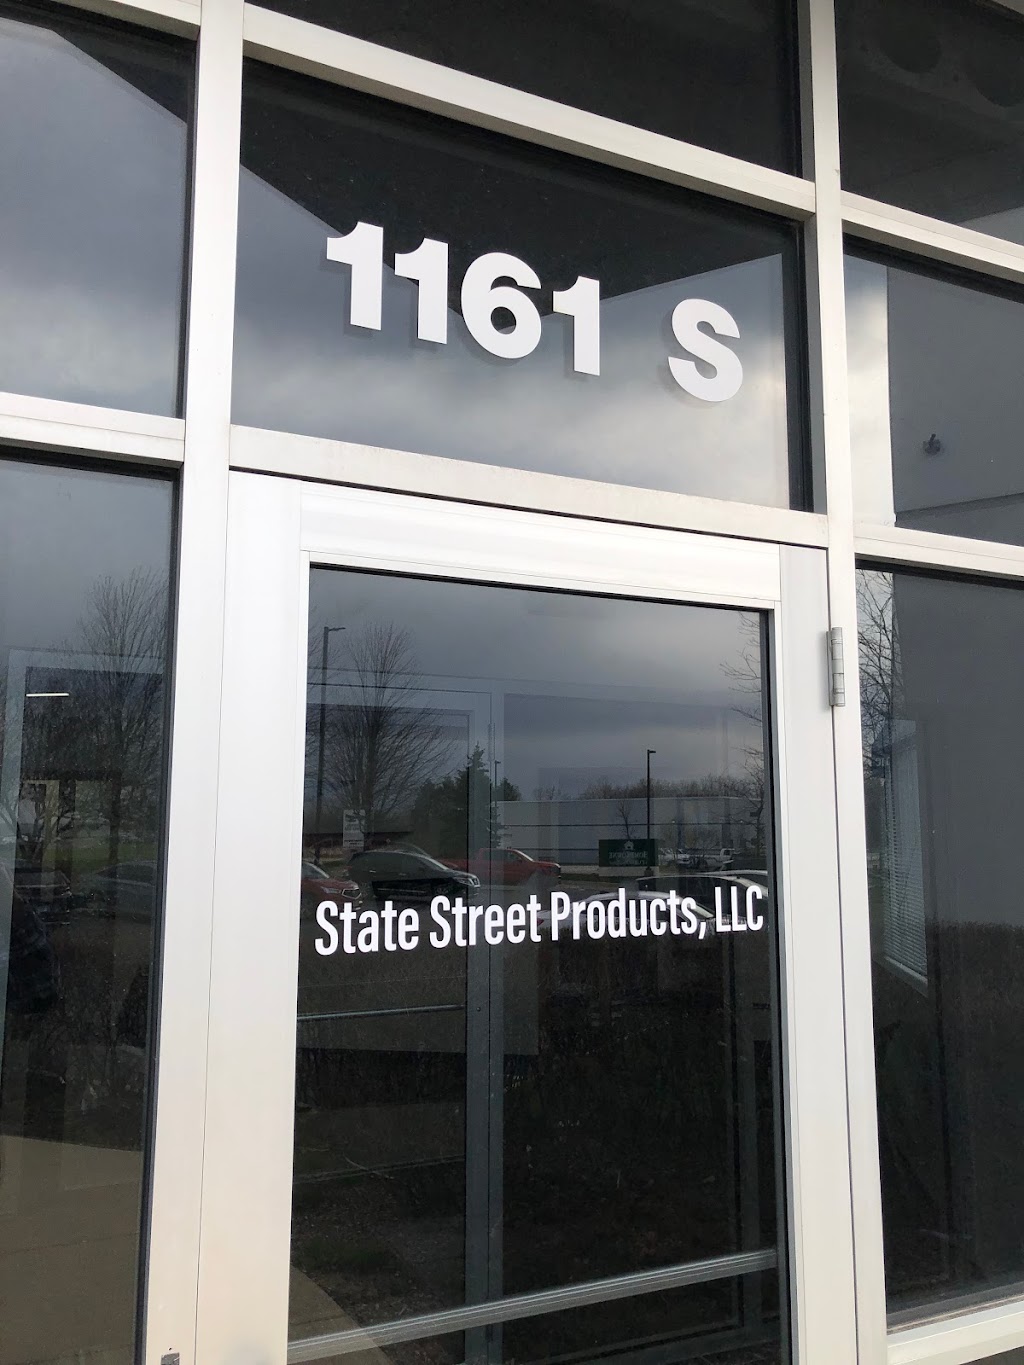 State Street Products, LLC | 1161 S Northpoint Blvd, Waukegan, IL 60085 | Phone: (847) 548-0996